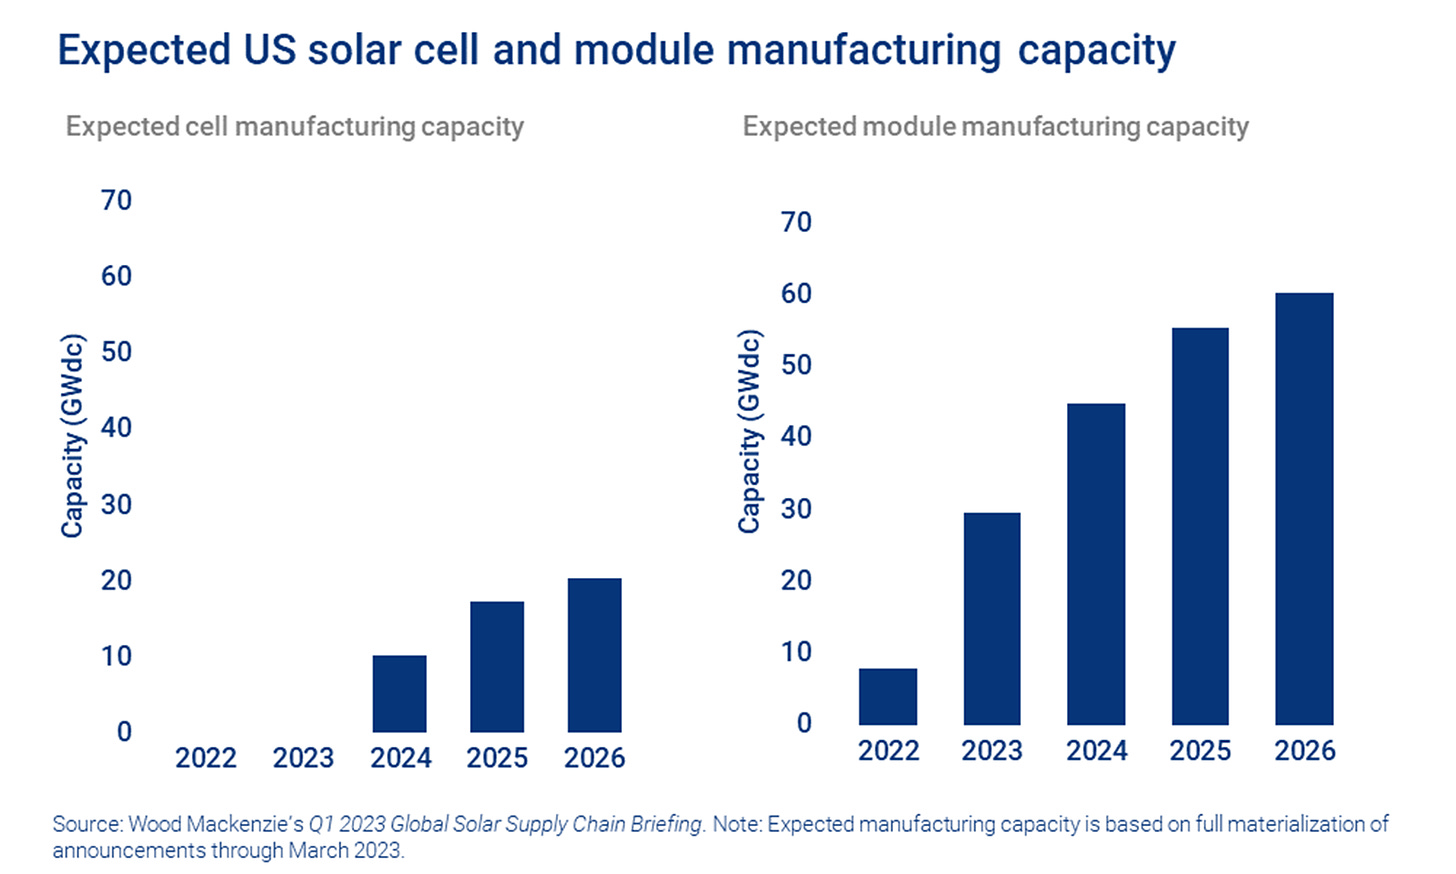 Expected US cell and module manufacturing capacity